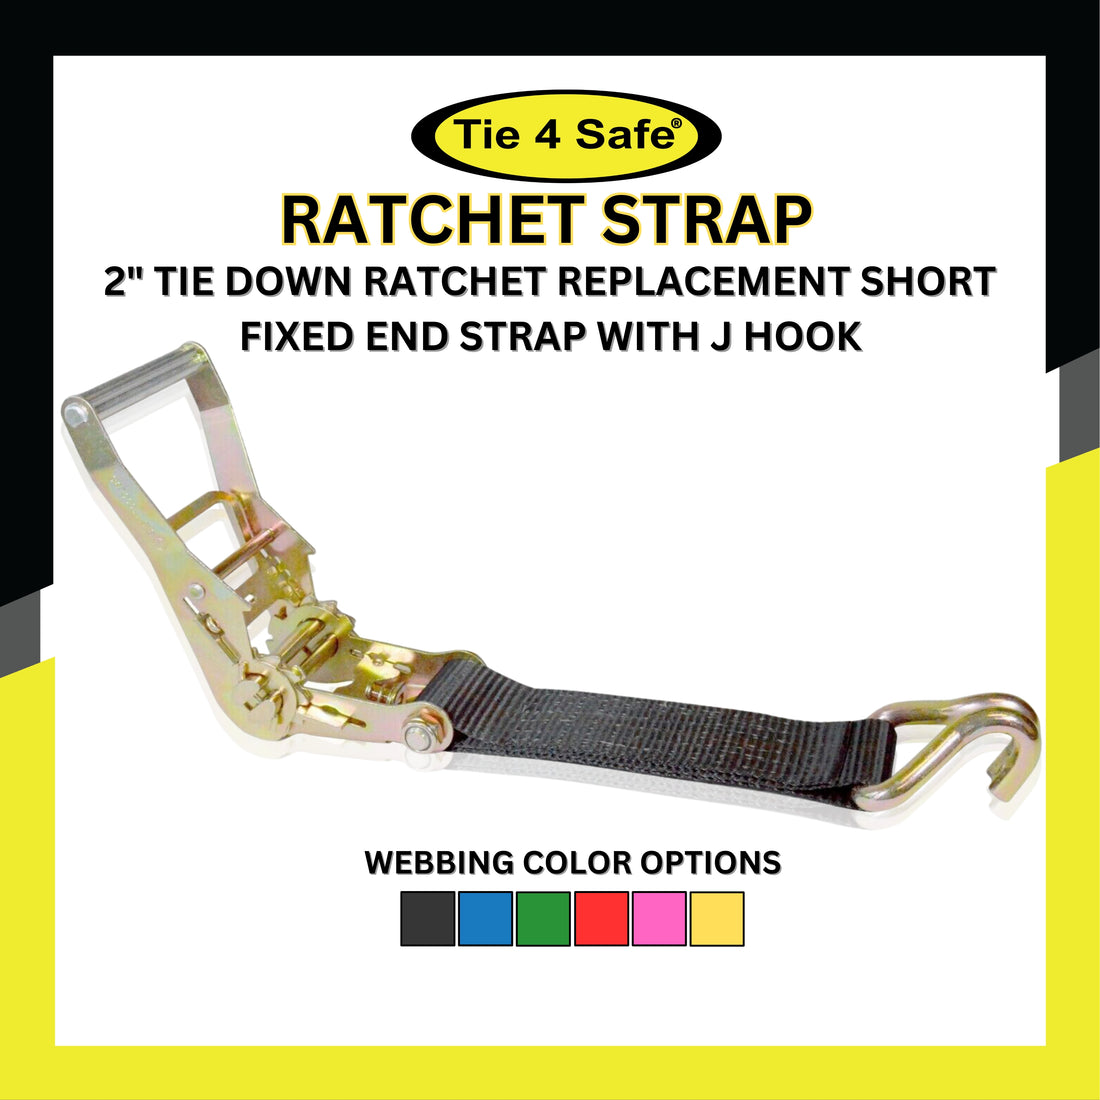 USA 2 Tie Down Ratchet Replacement Short Fixed End Strap With J Hook – Tie  4 Safe